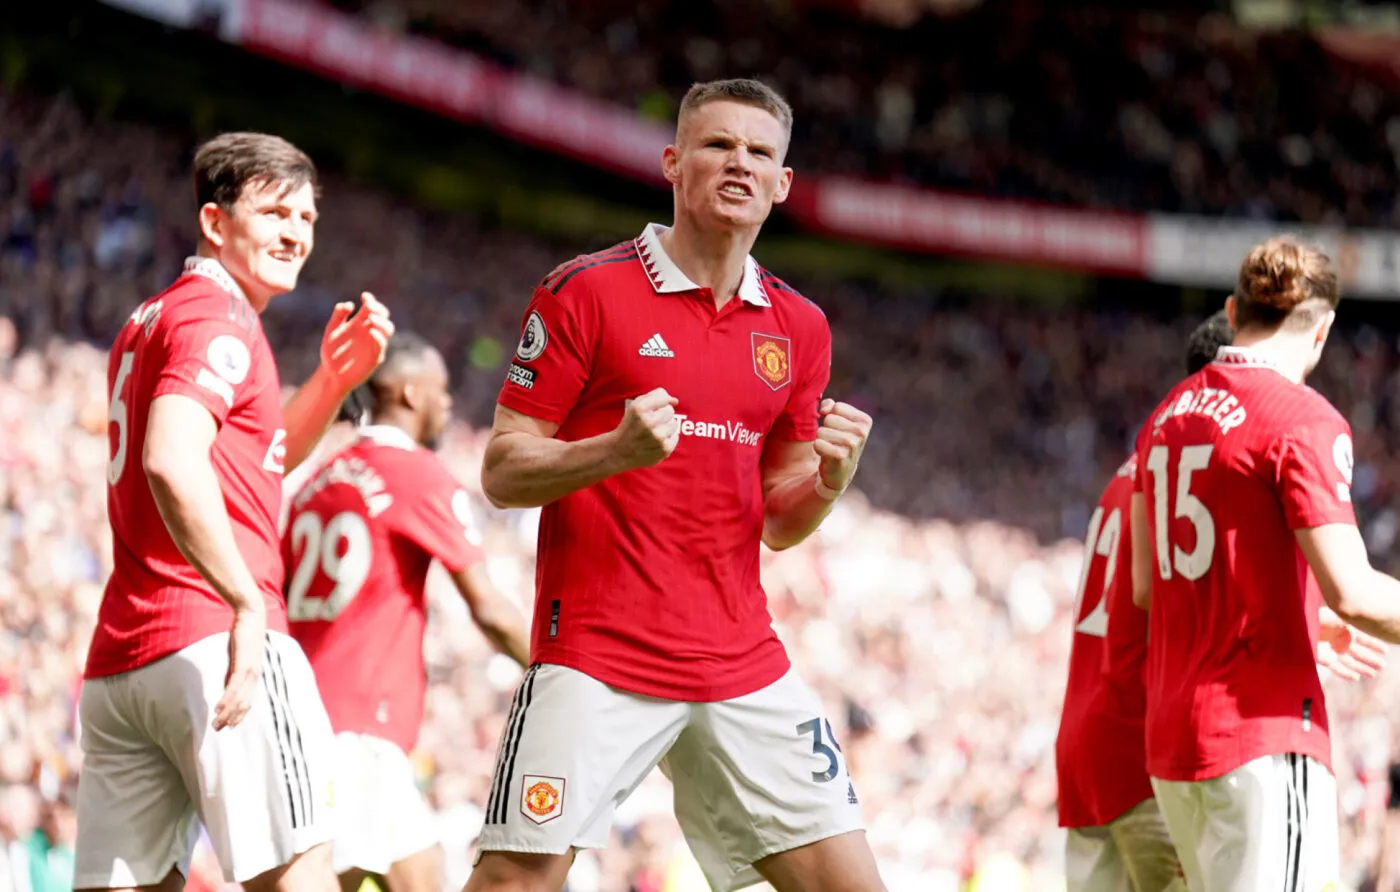 Manchester United's Scott McTominay celebrates scoring the opening goal during the Premier League match at Old Trafford, Manchester. Picture date: Saturday April 8, 2023. - Photo by Icon sport